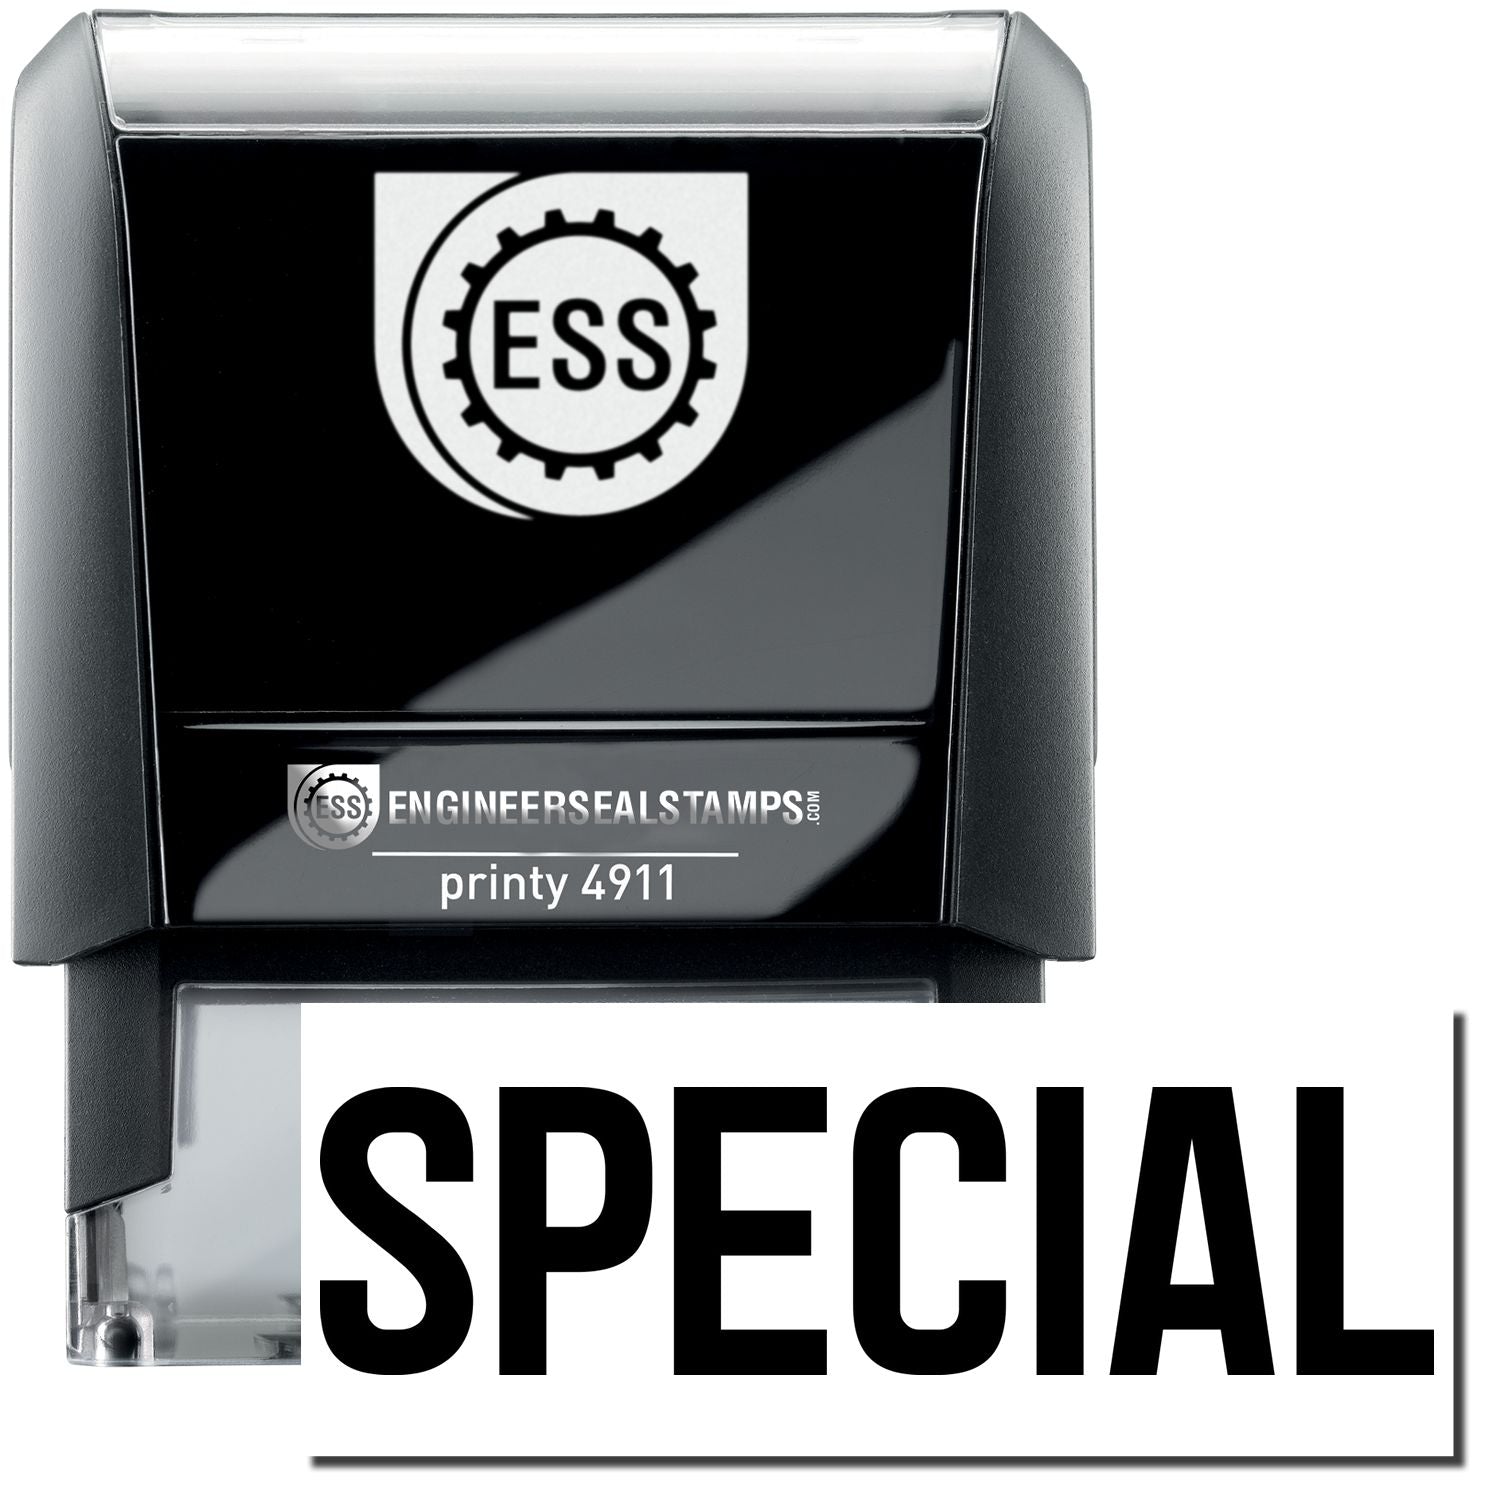 A self-inking stamp with a stamped image showing how the text "SPECIAL" is displayed after stamping.